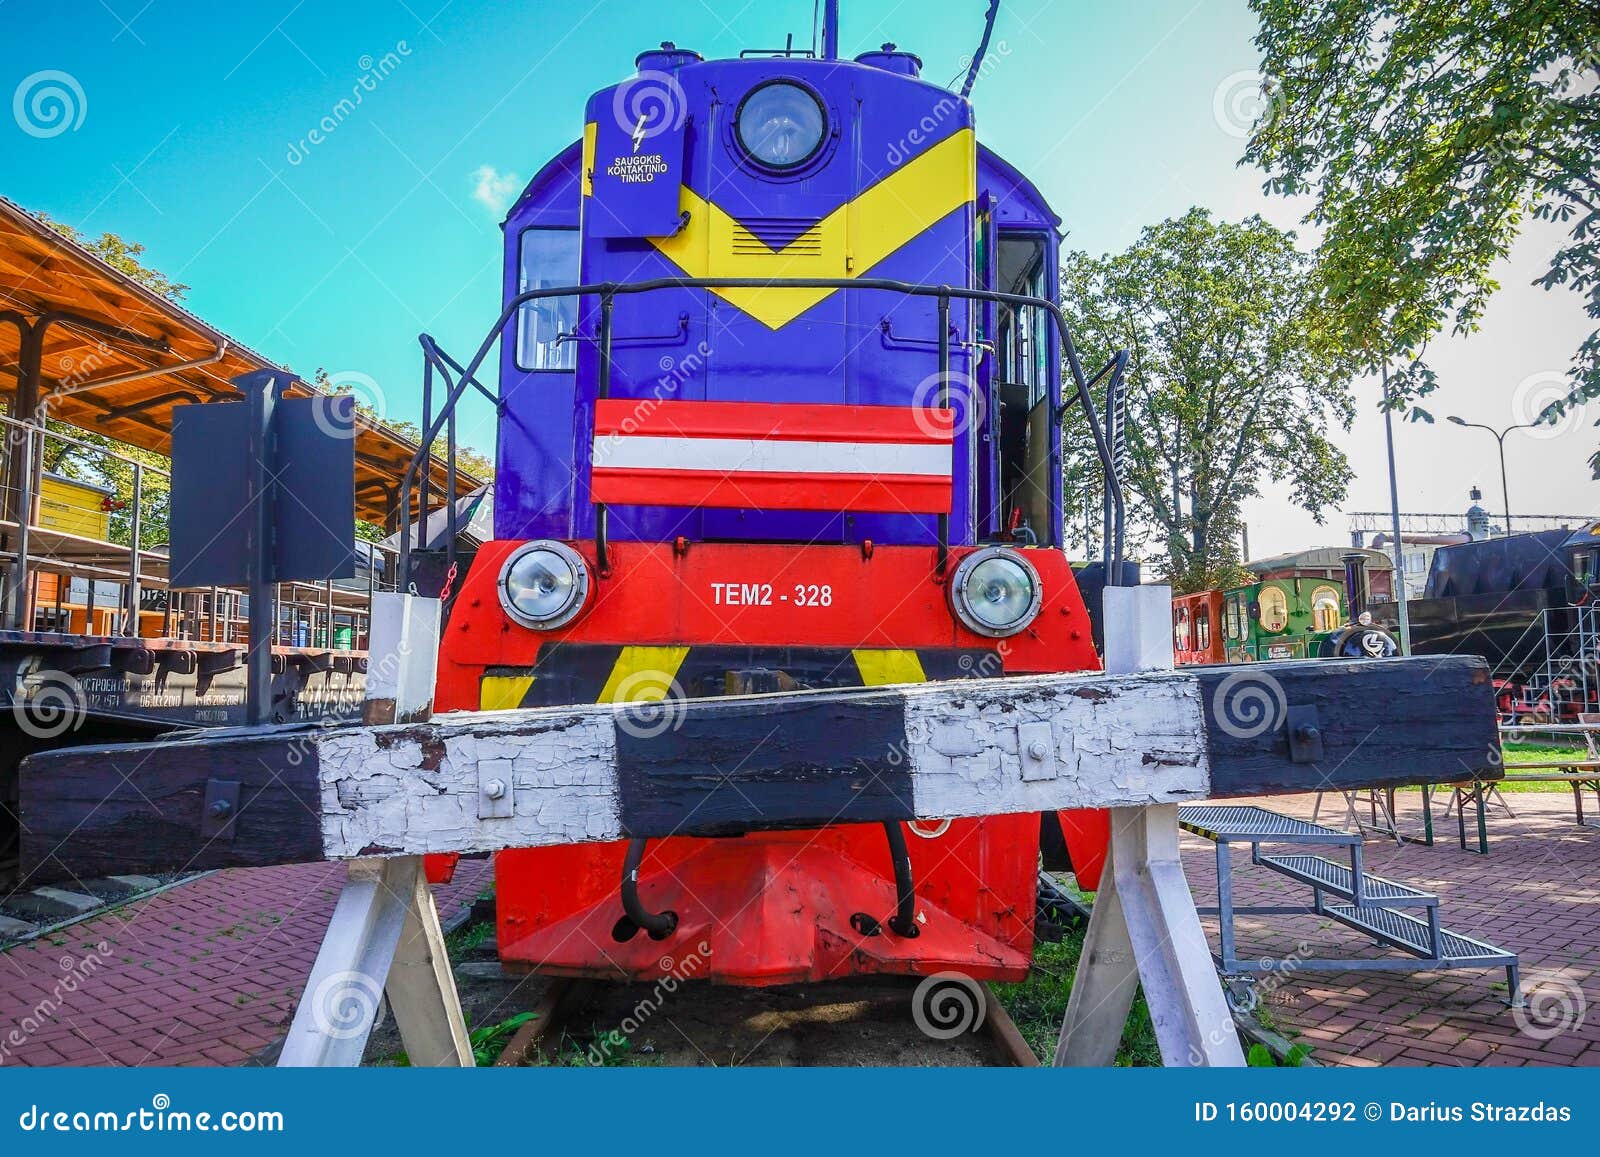 Railway Museum In Vilnius Near Station Editorial Photography - Image of transport, lietuvos ...